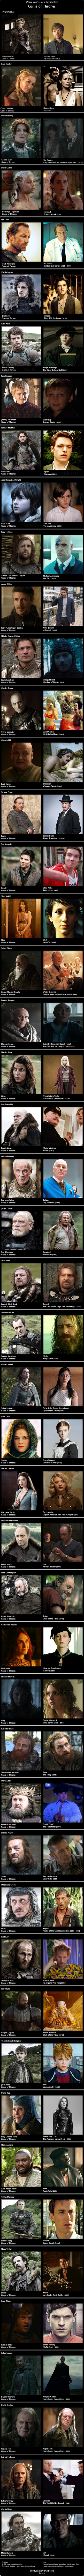 funny-picture-cool-actors-game-of-thrones